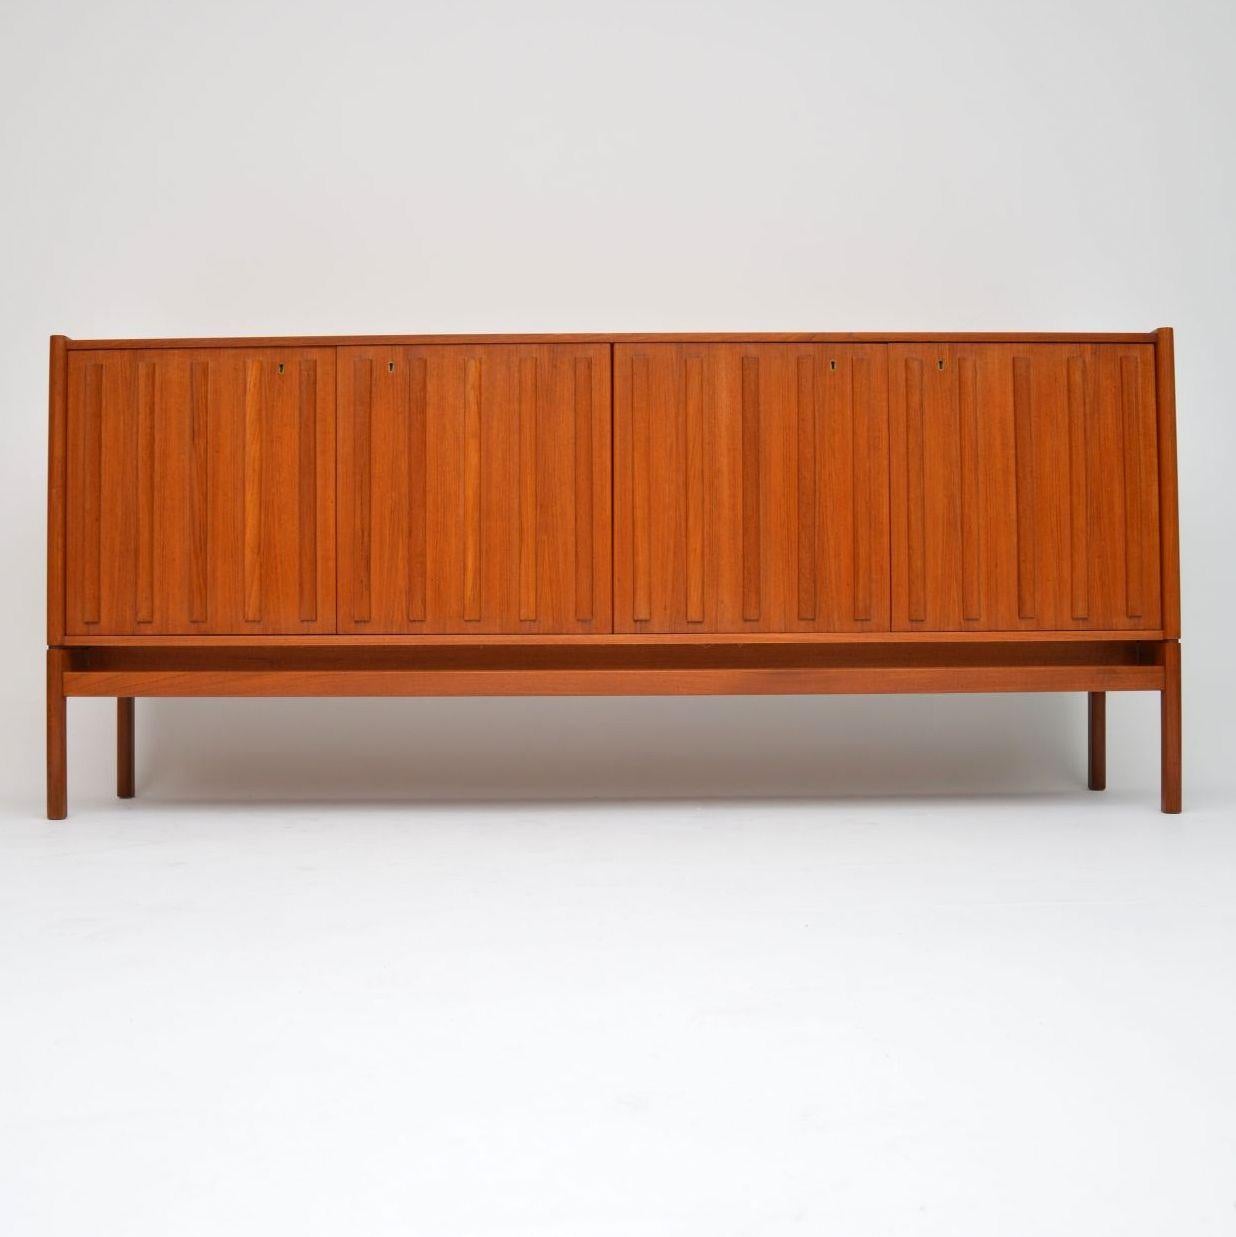 An amazingly rare and extremely well made vintage teak sideboard from the 1960s, this is a design by Arne Halvorsen, made by L. Jacobsen in Norway during the 1960s. The quality is amazing and the condition is absolutely superb, we have had this